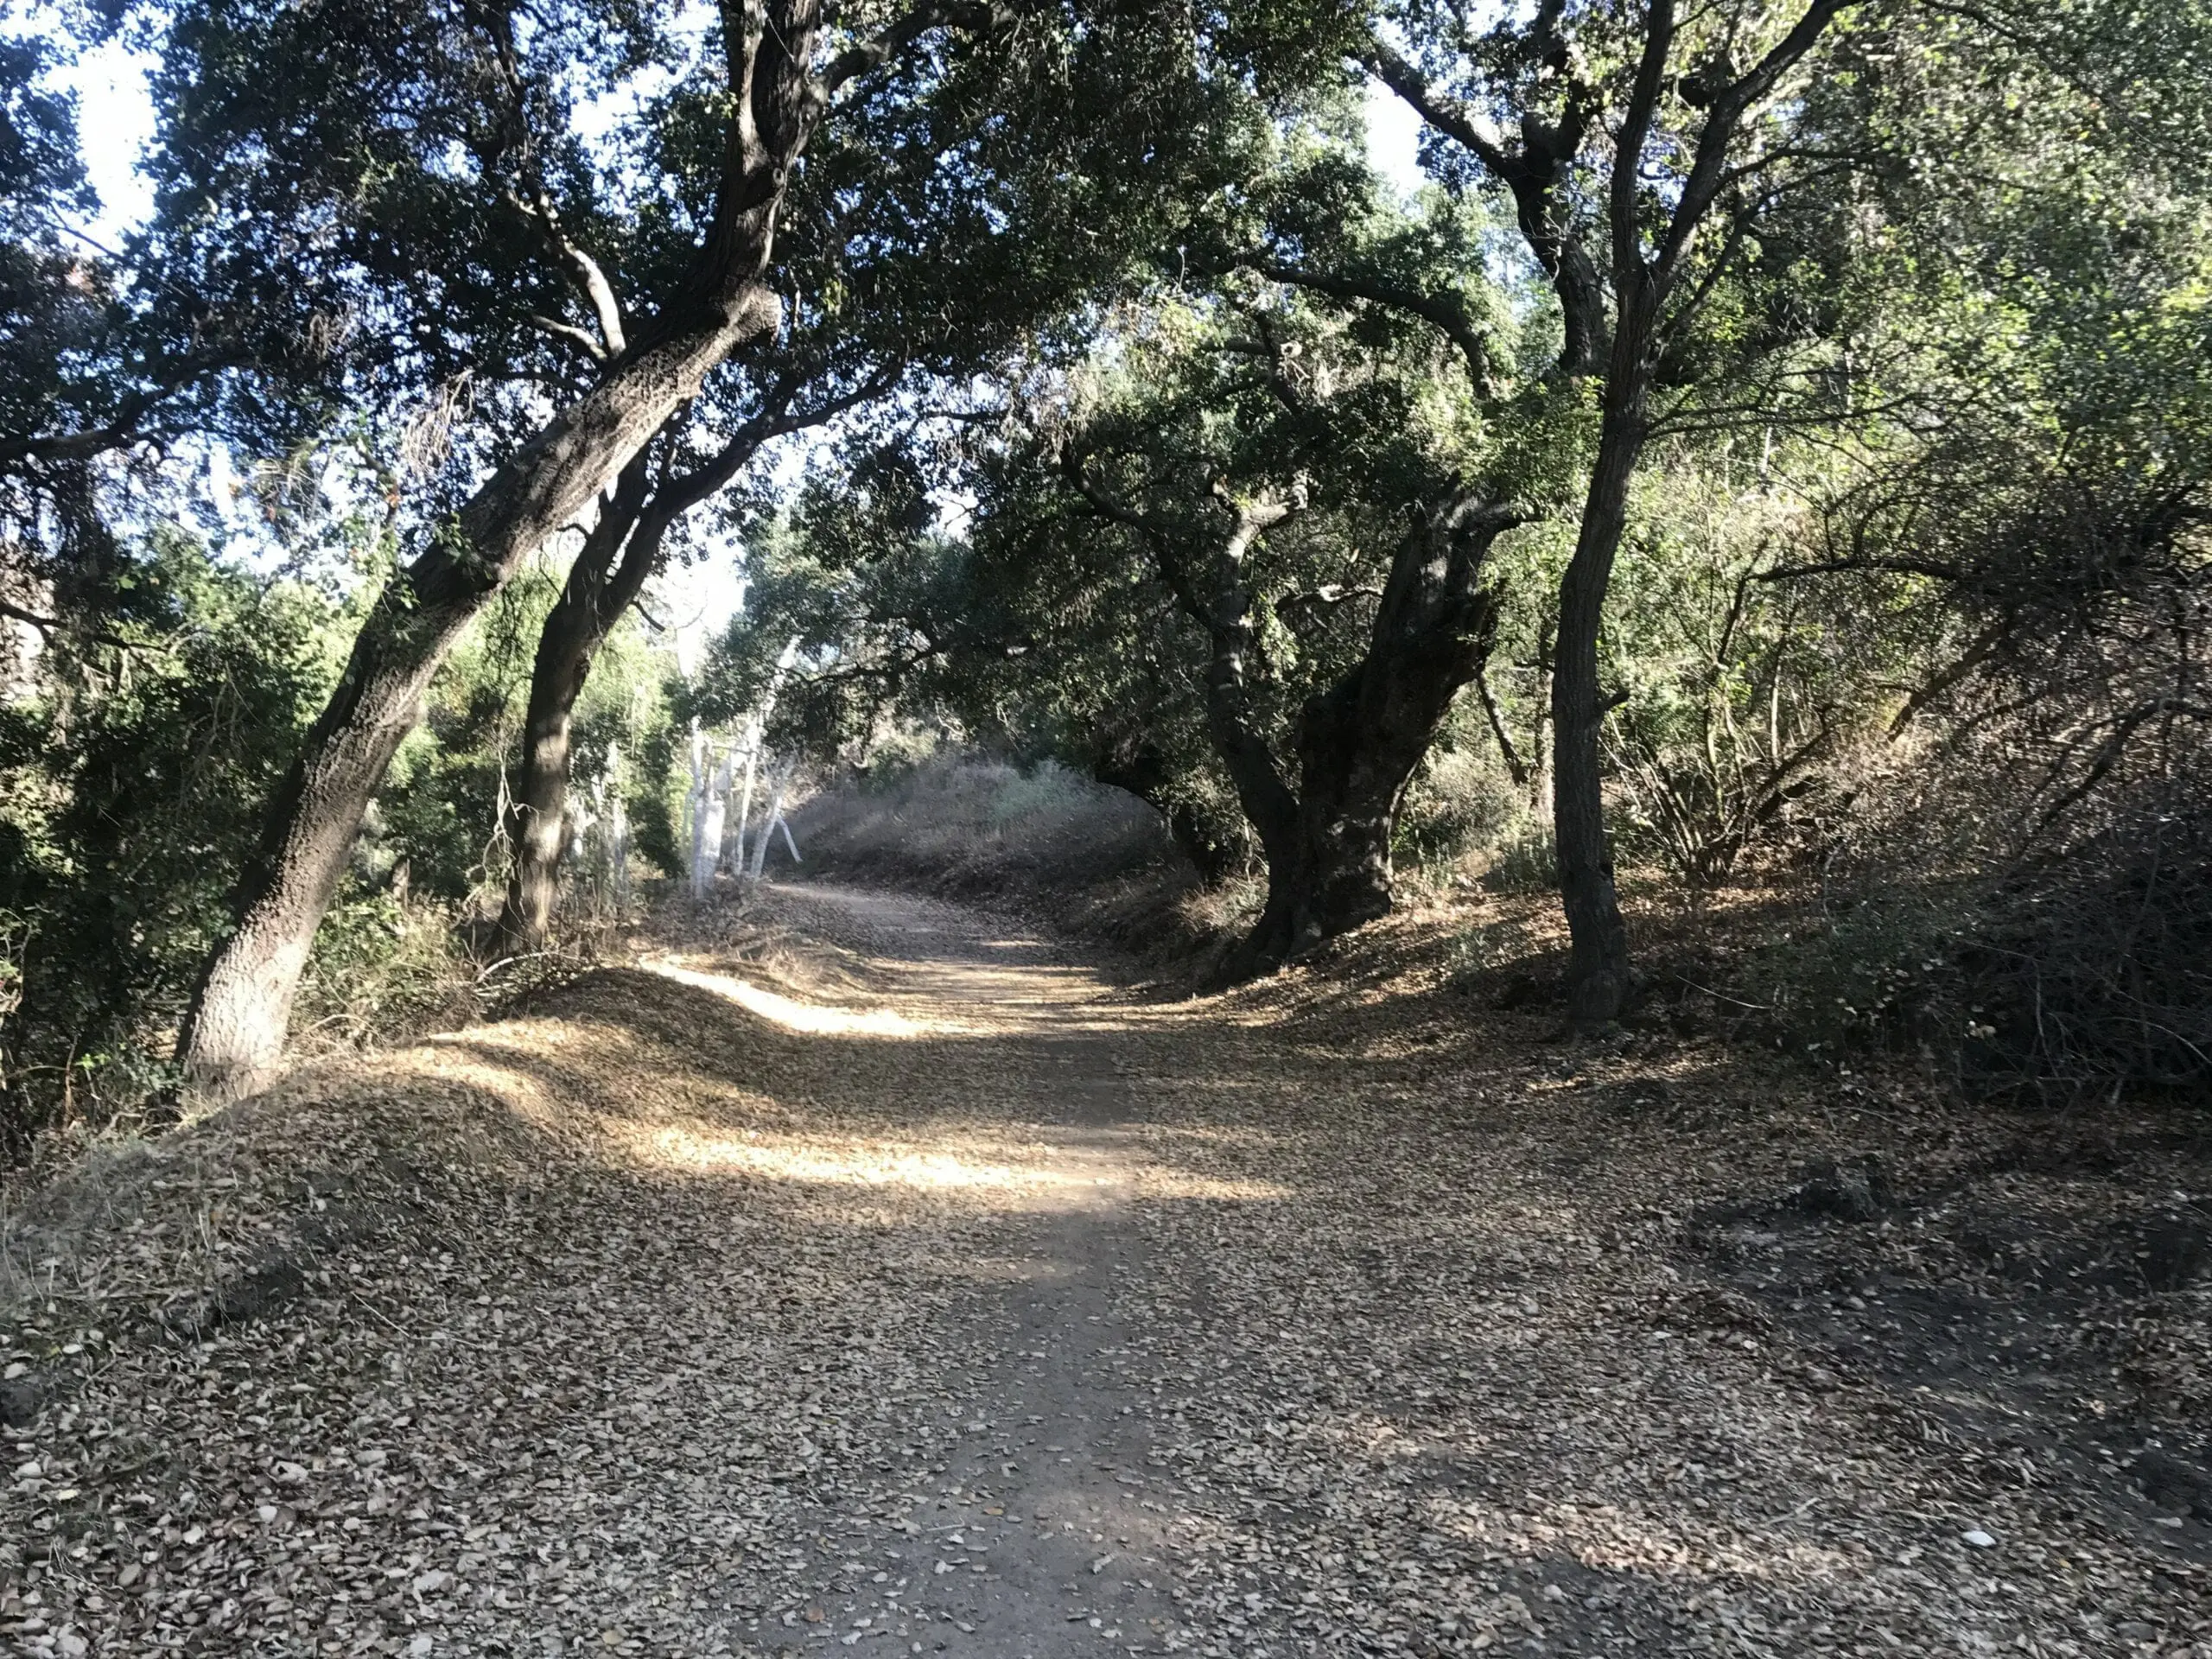 Turnbull Canyon hiking trail shaded by large trees